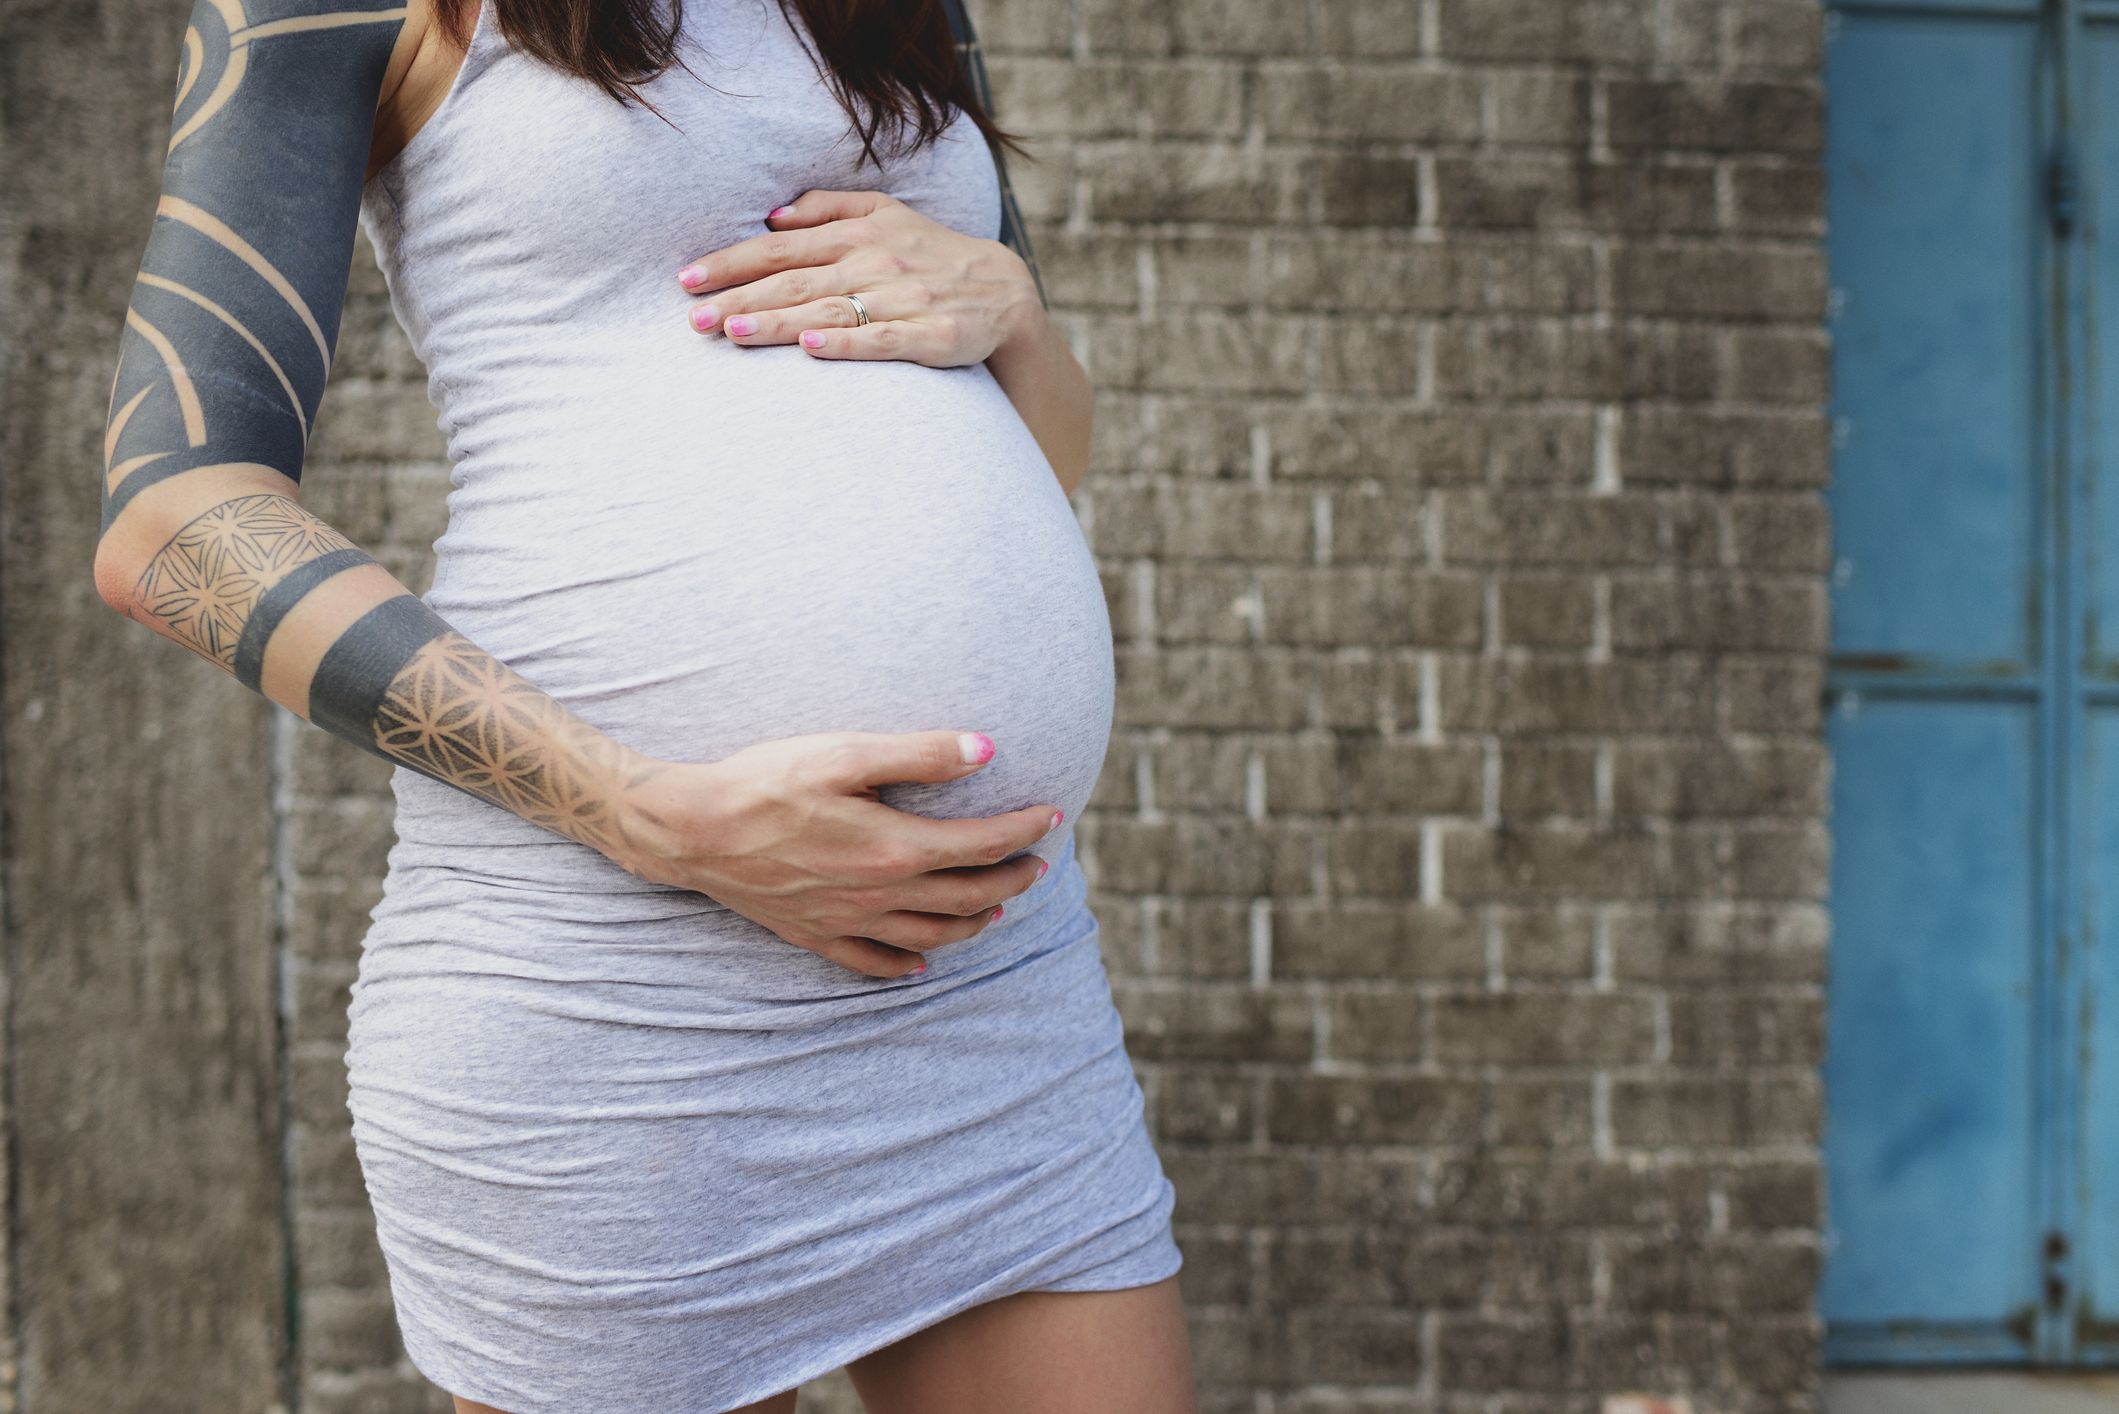 Tattoos and Pregnancy| Can You Get a Tattoo While Pregnant